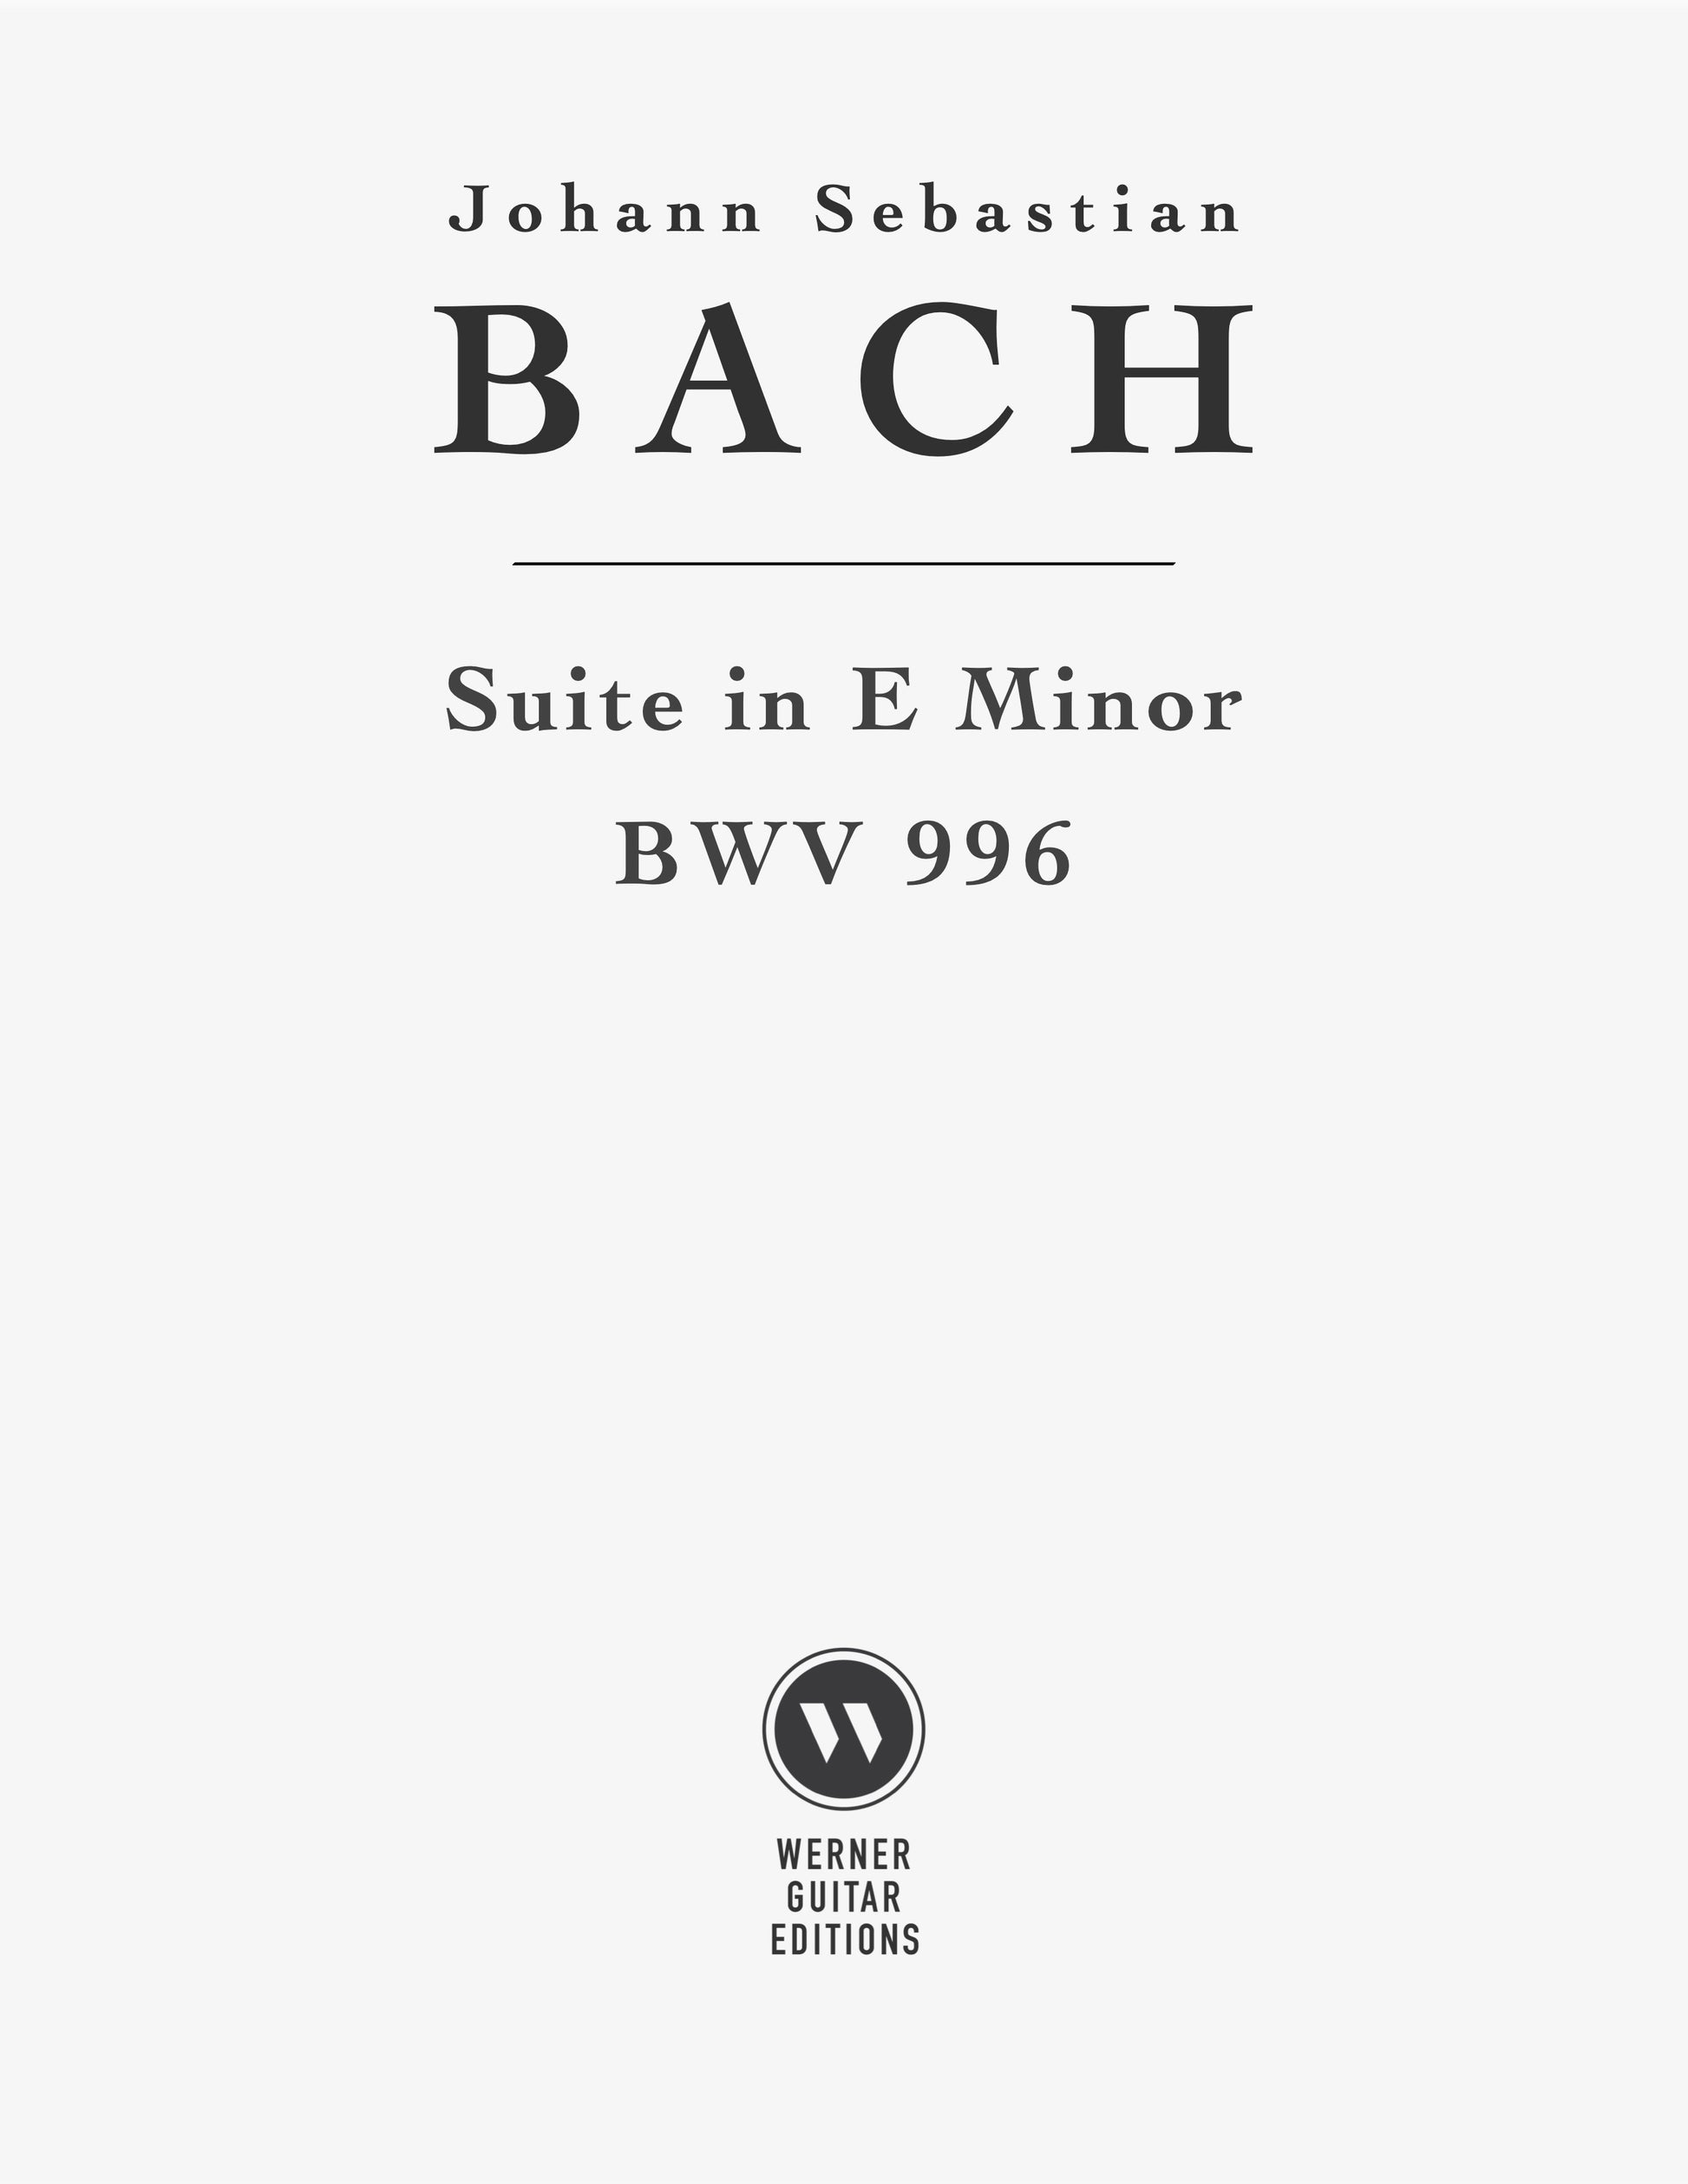 Lute Suite in E Minor BWV 996 by Bach for Classical Guitar (PDF)